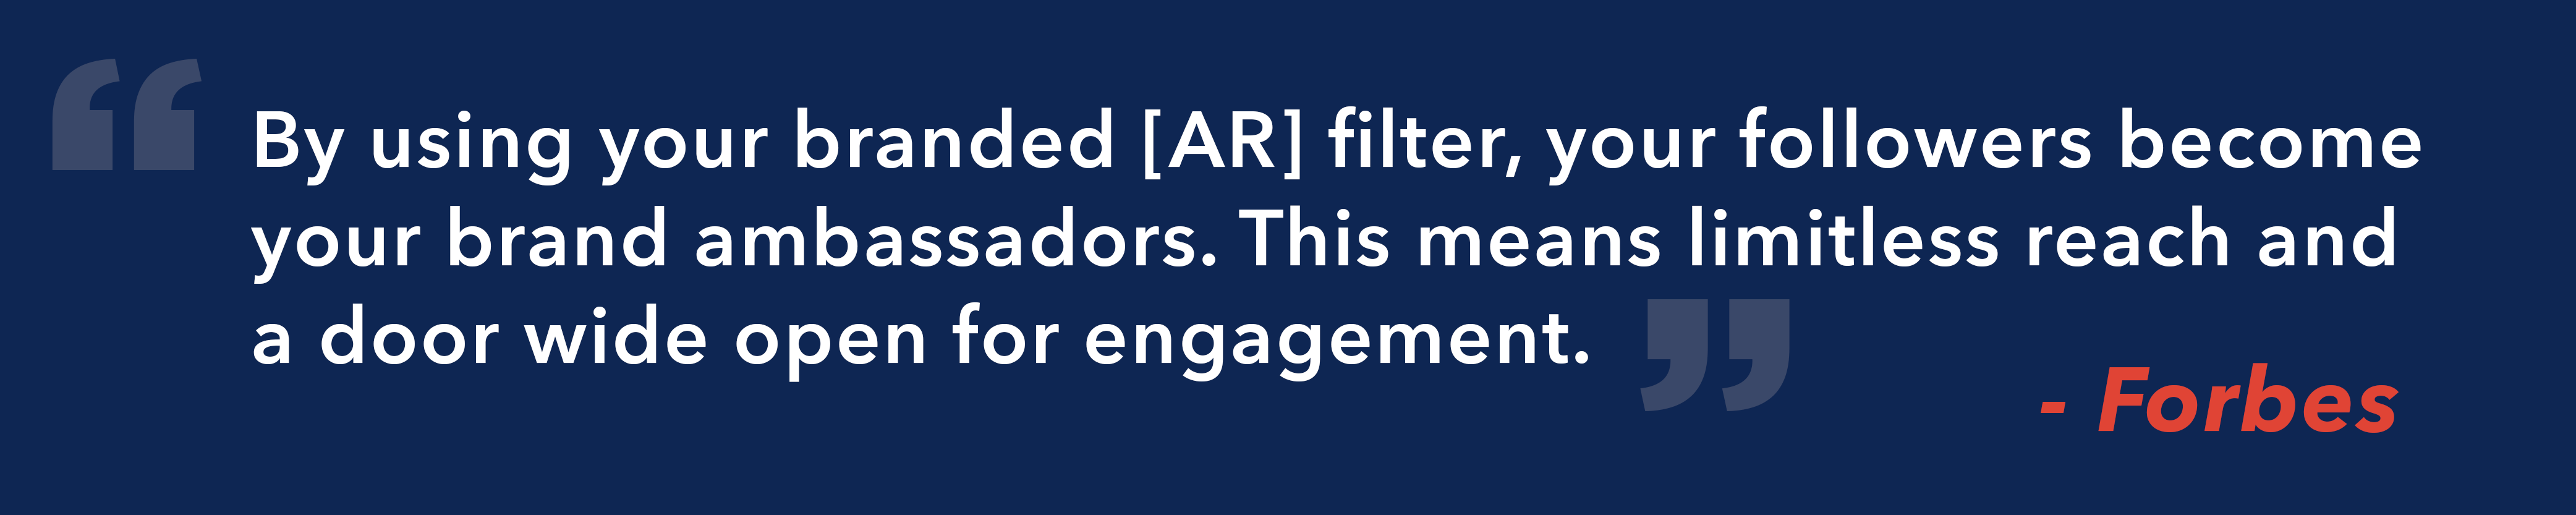 A navy blue text graphic that reads: By using your branded [AR] filter, your followers become your brand ambassadors. This means limitless reach and a door wide open for engagement.